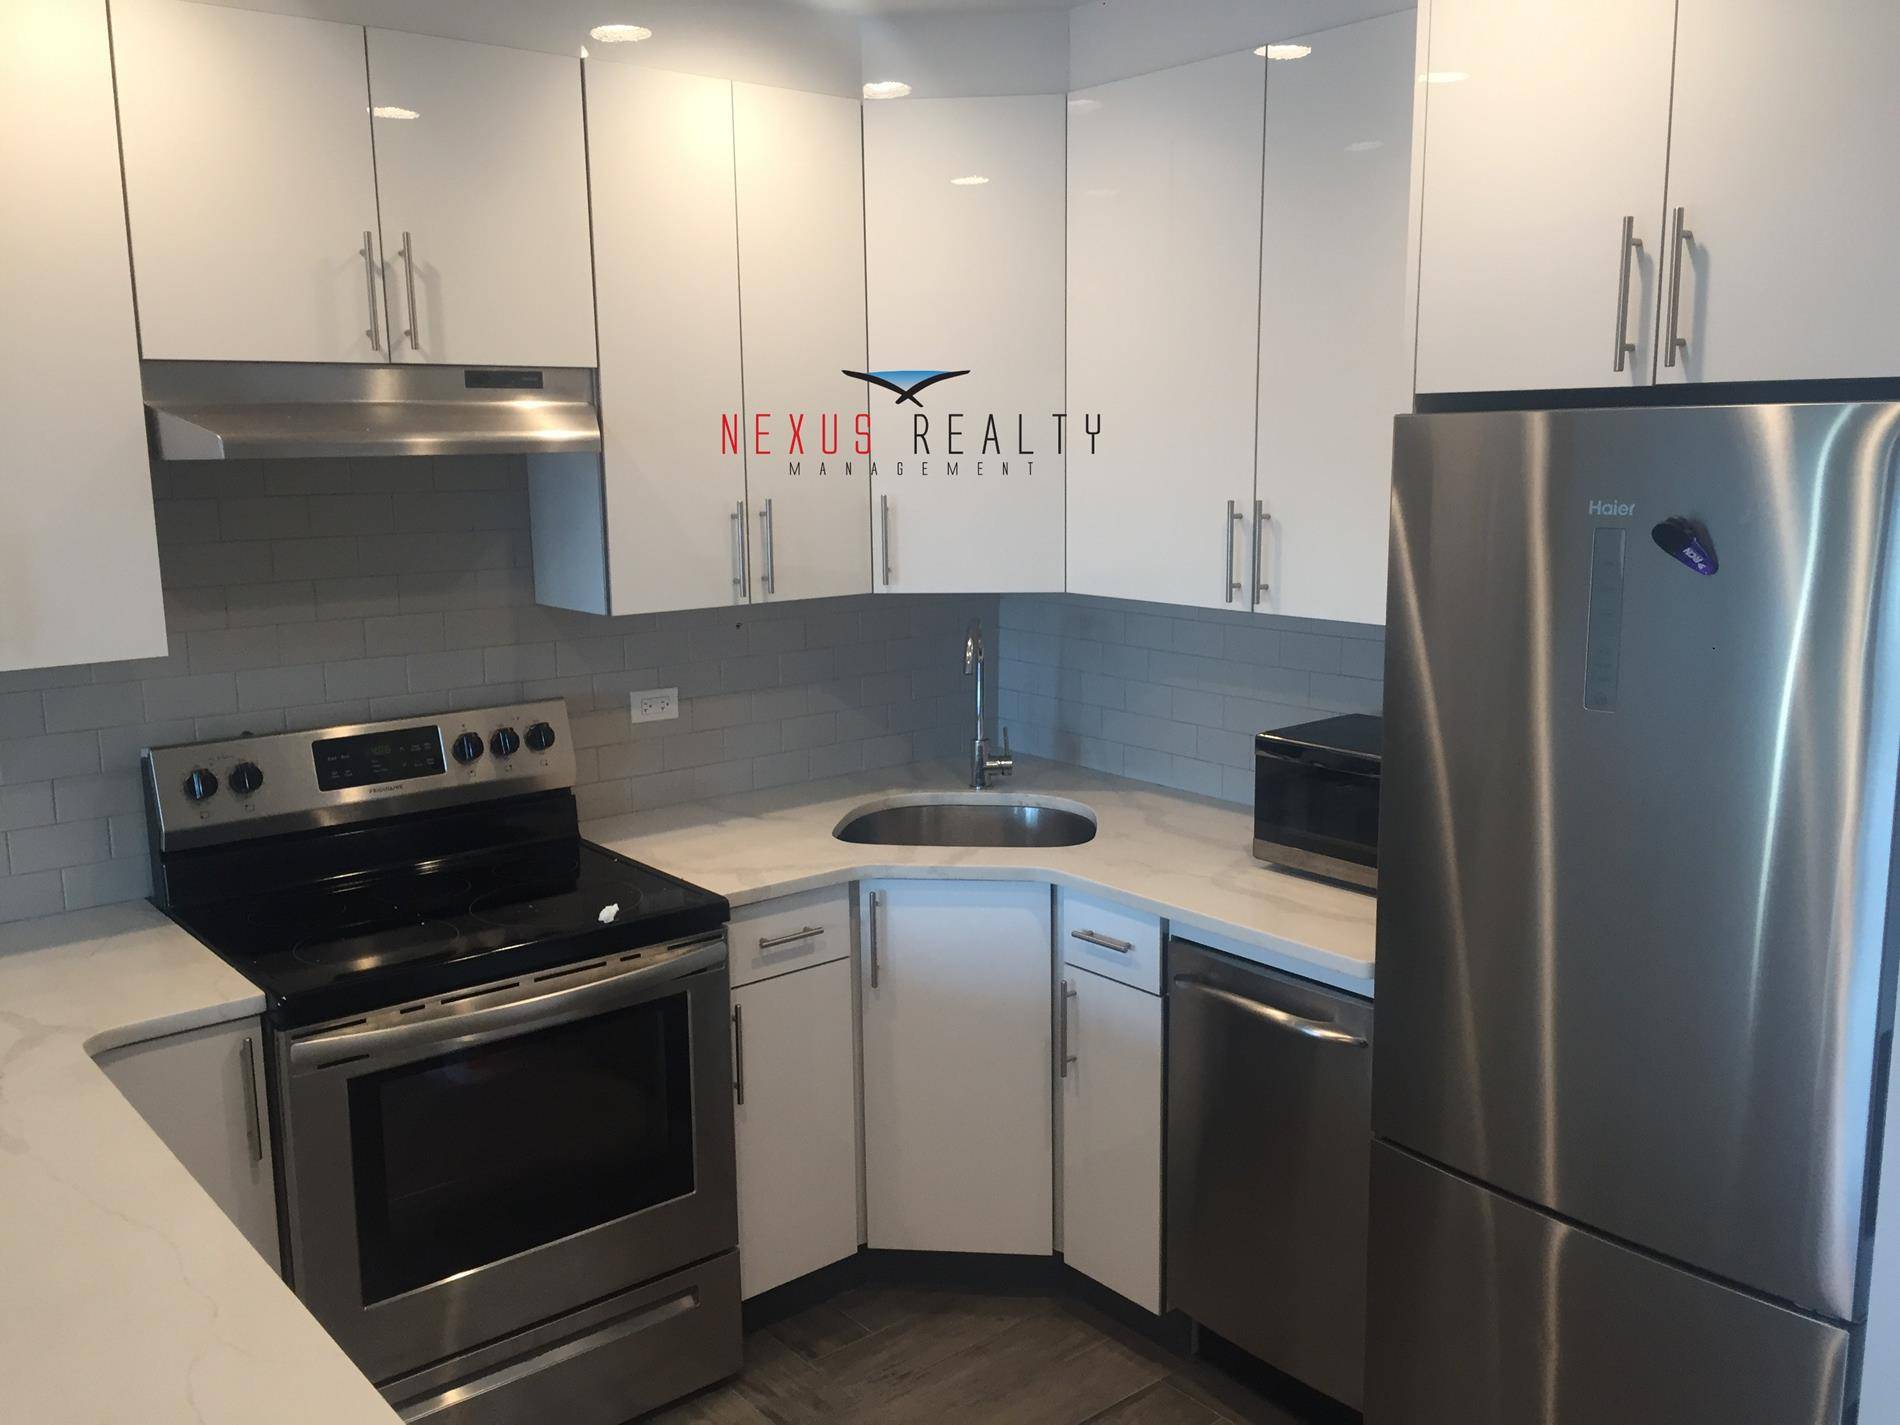 BRAND NEW 1 Bedroom apartment in Astoria 2400 NO BROKERS FEEAmazing and modern 1 bedroom apartment on the 3rd floor of The Grayson building with great closet space and lots ...